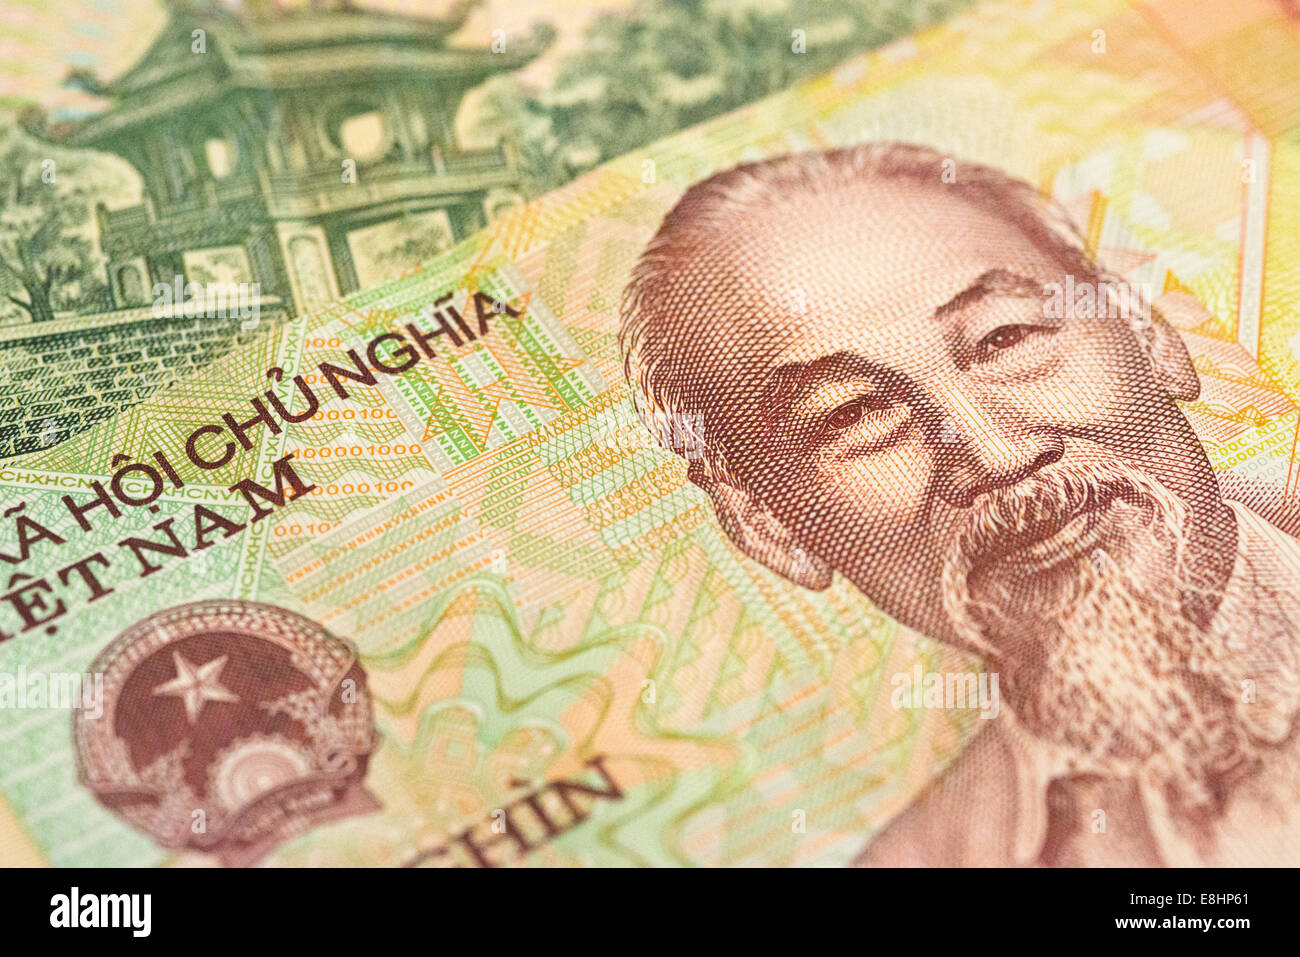 Close-up shots of Vietnamese paper currency, known as dong. Stock Photo